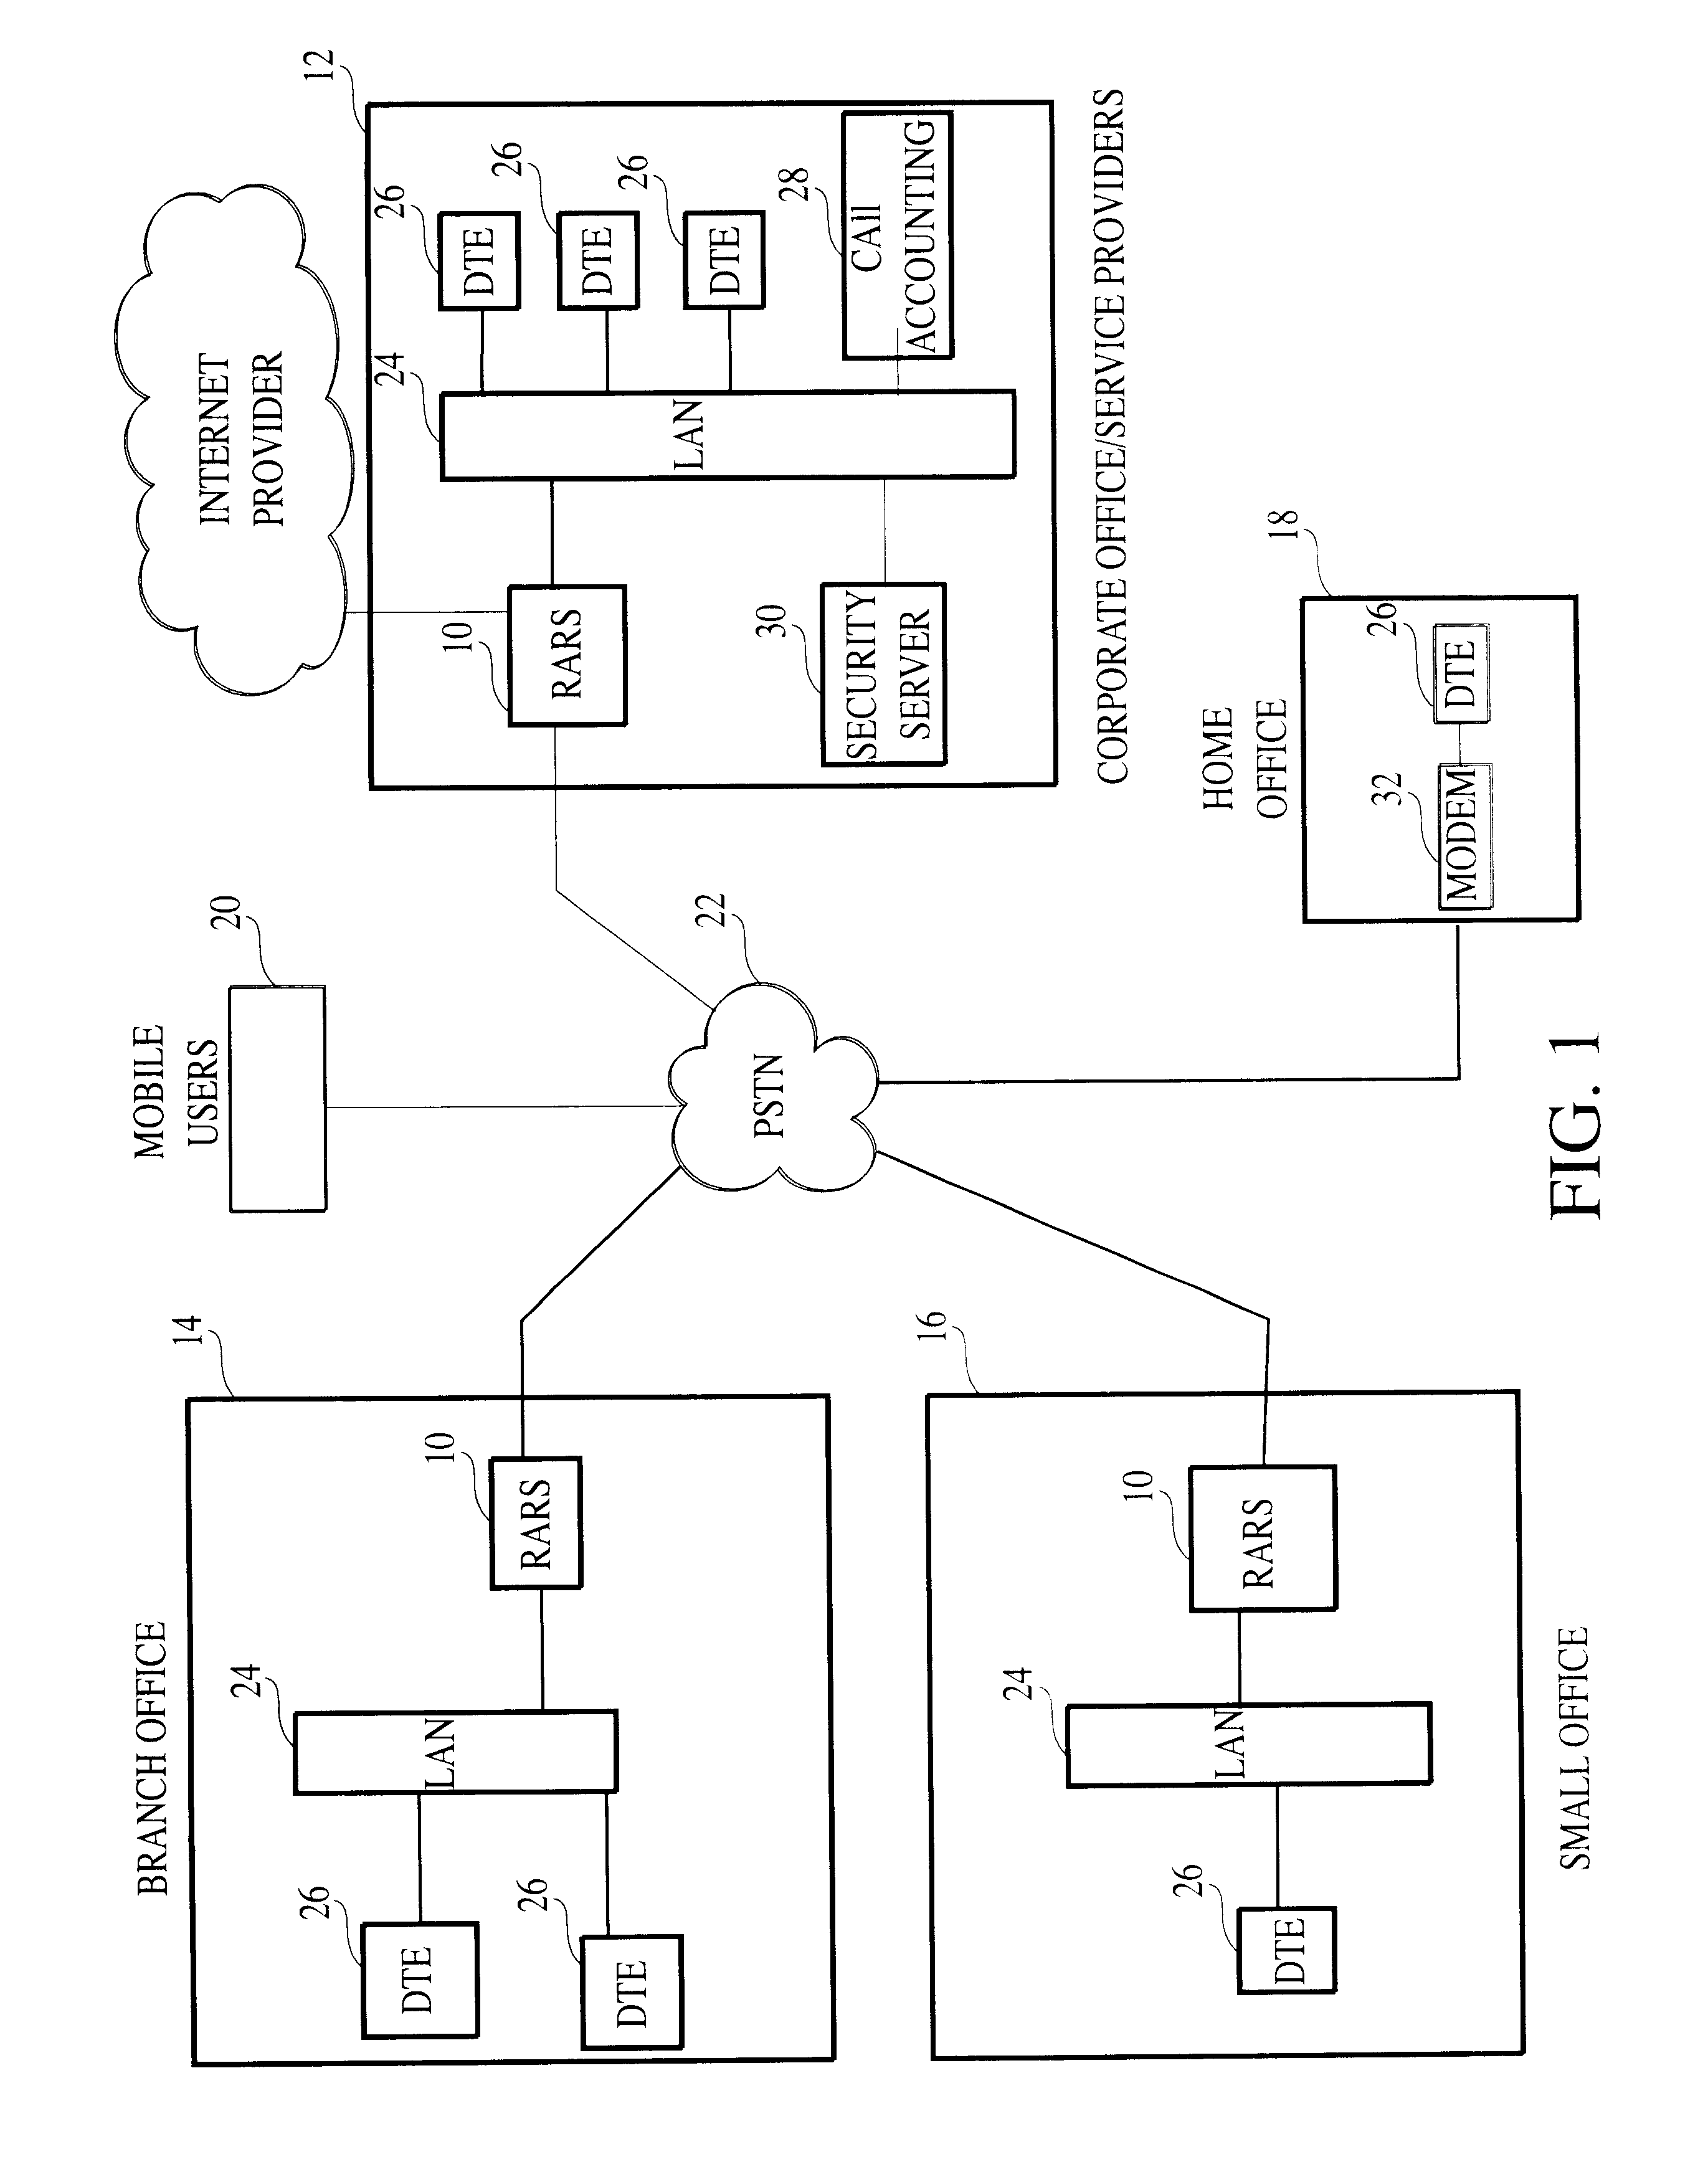 Method and apparatus for operating the internet protocol over a high-speed serial bus